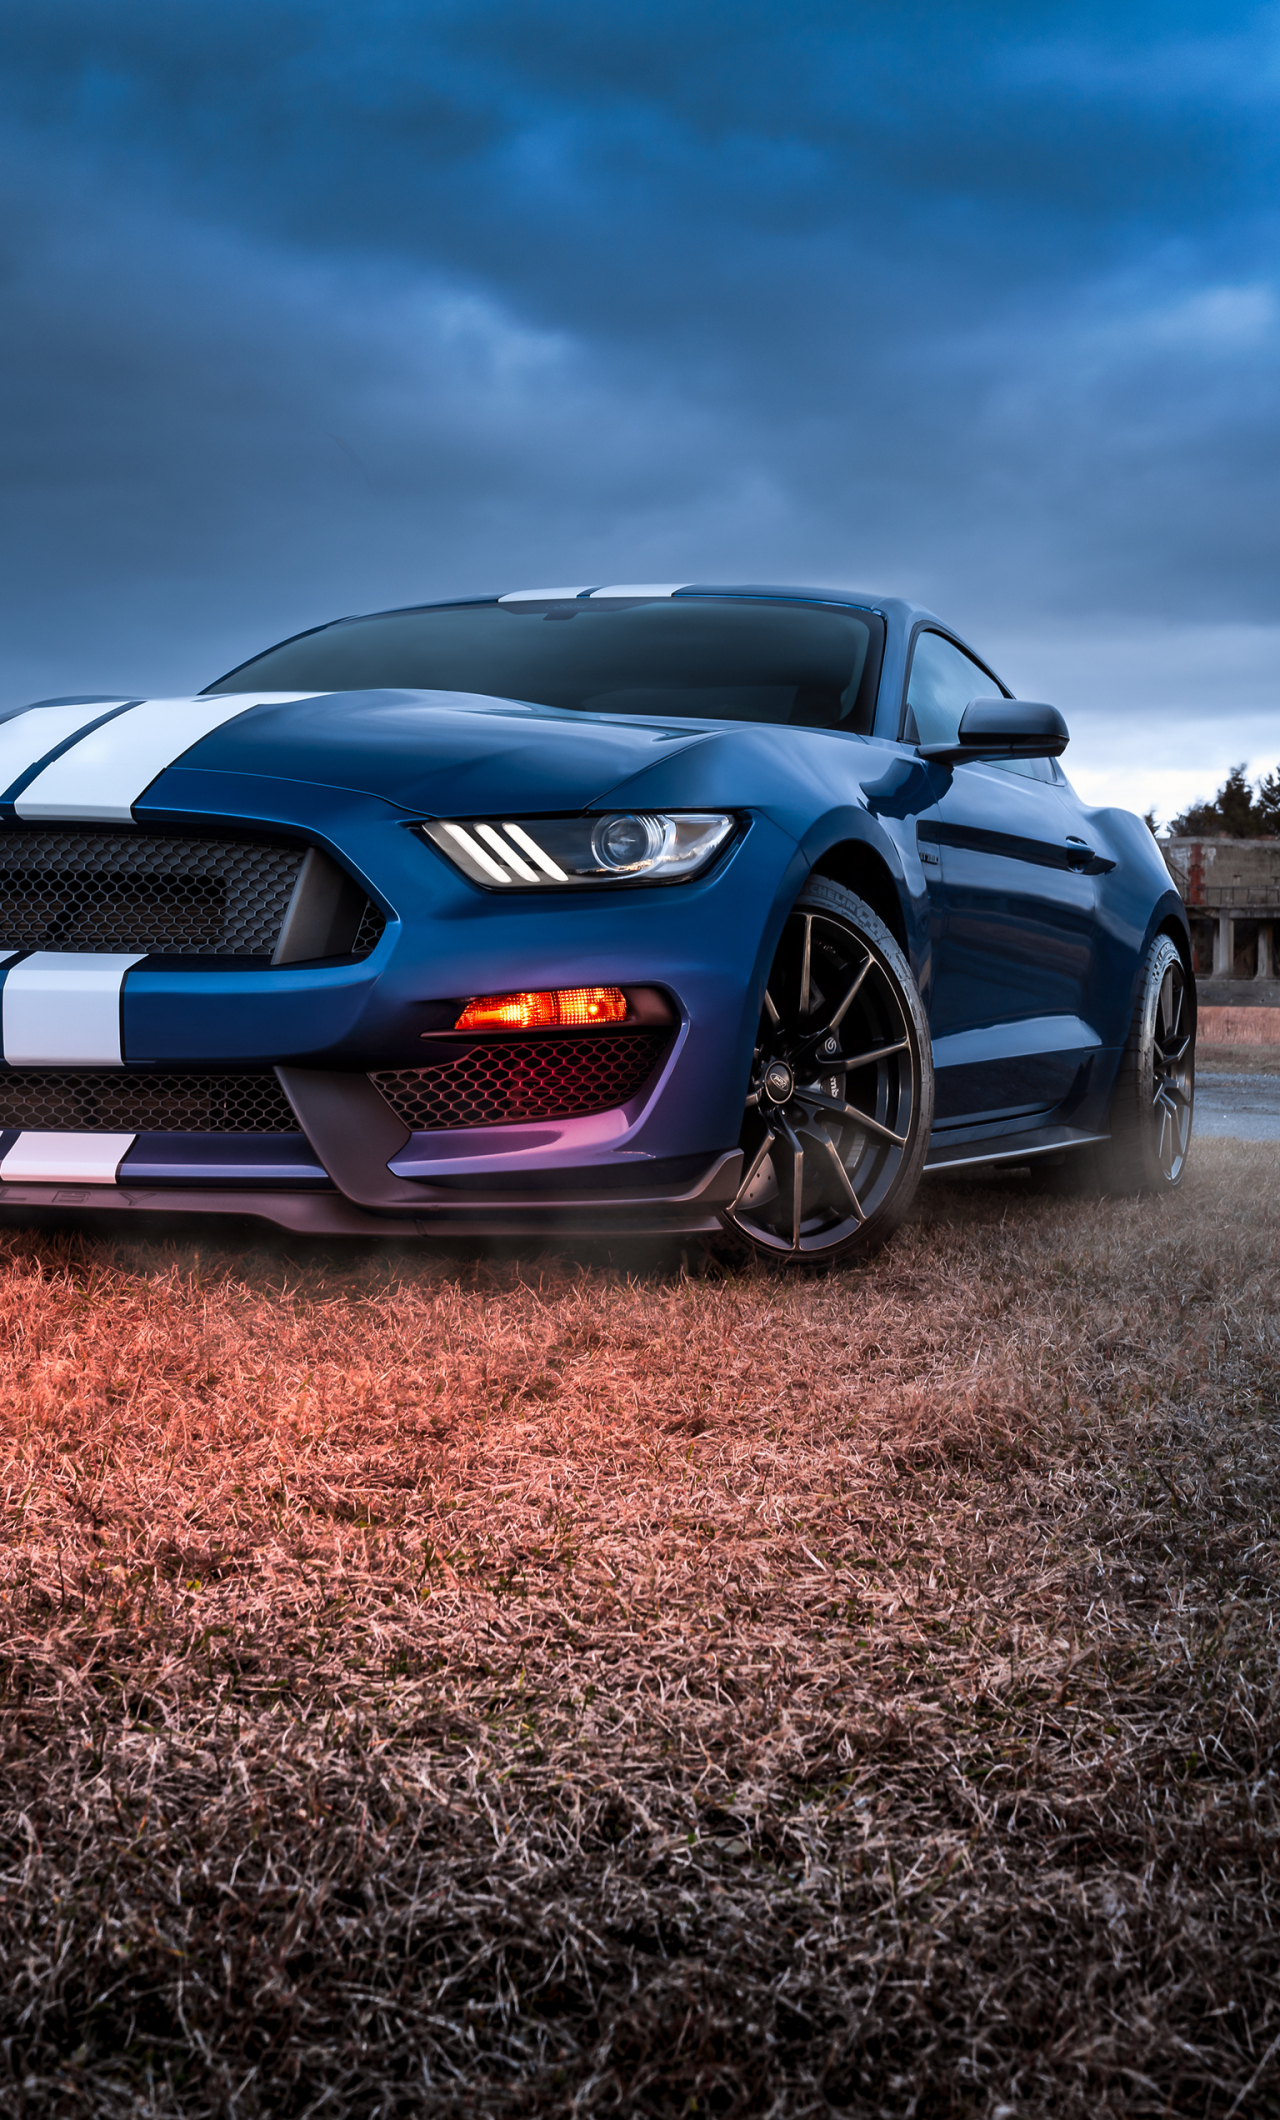 Download wallpaper 1280x2120 ford mustang, shelby gt500, muscle car, iphone  6 plus, 1280x2120 hd background, 25953